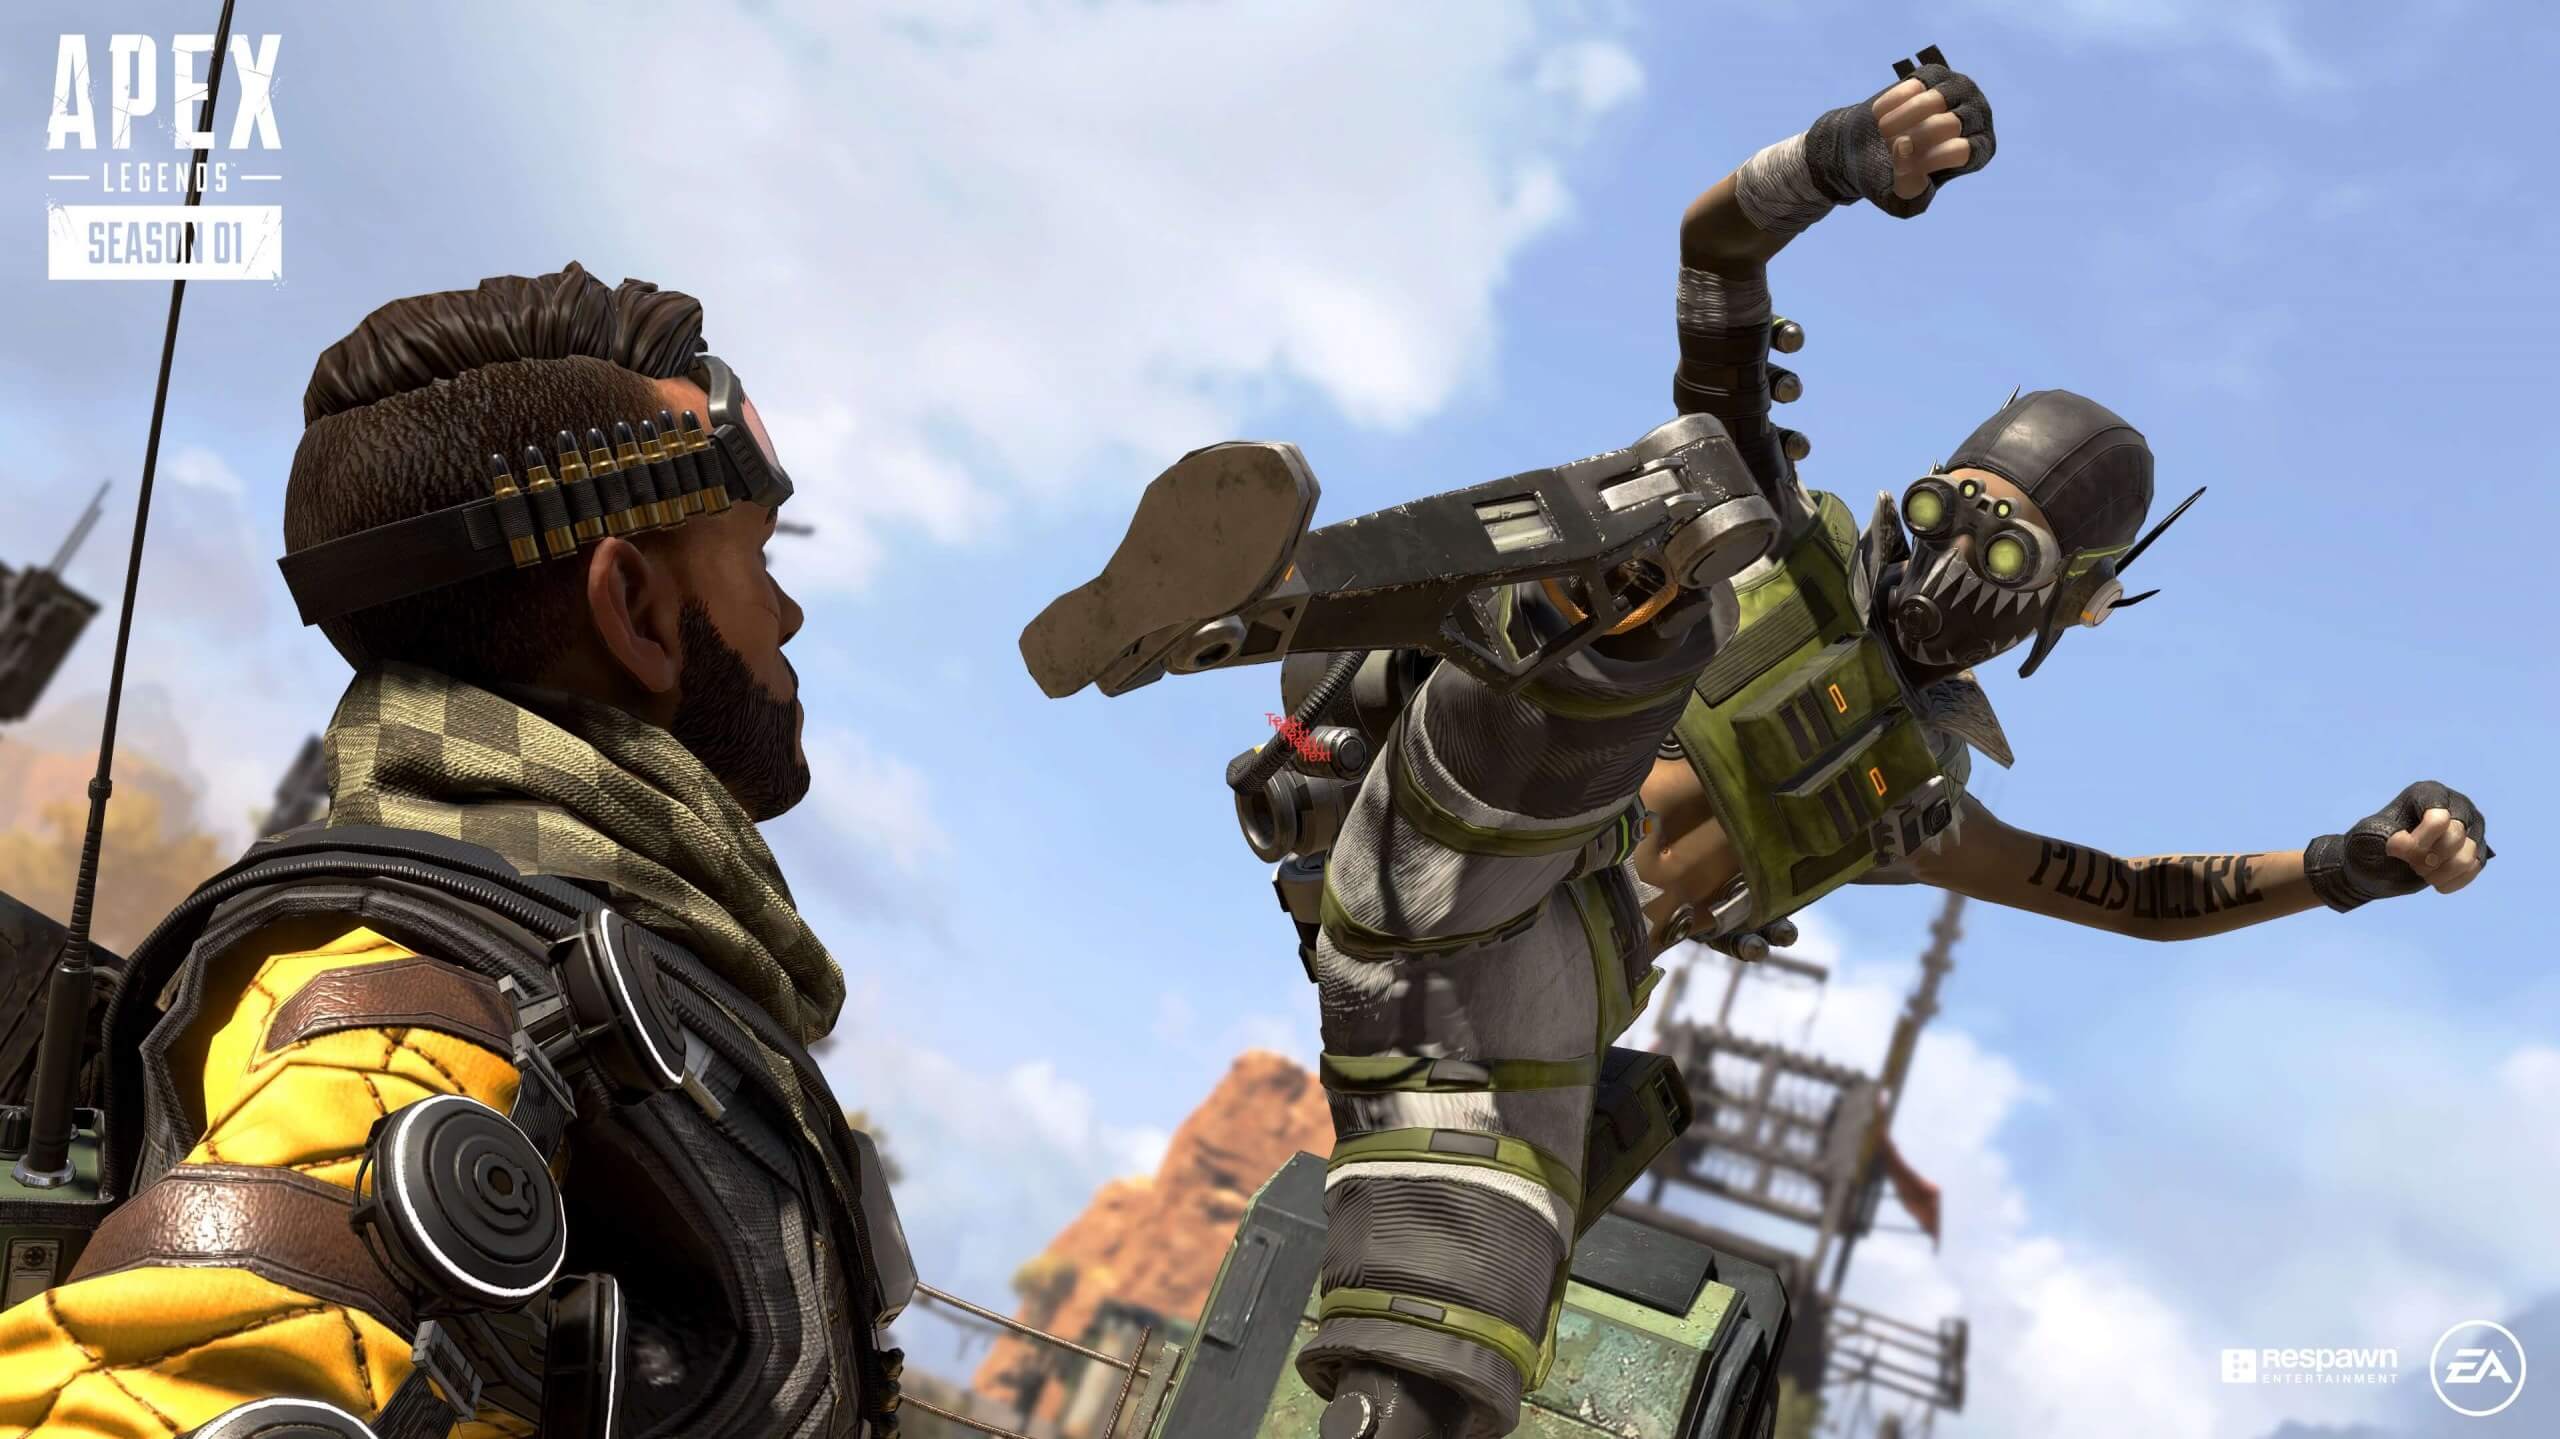 Respawn has banned 770,000 Apex Legends cheaters since launch